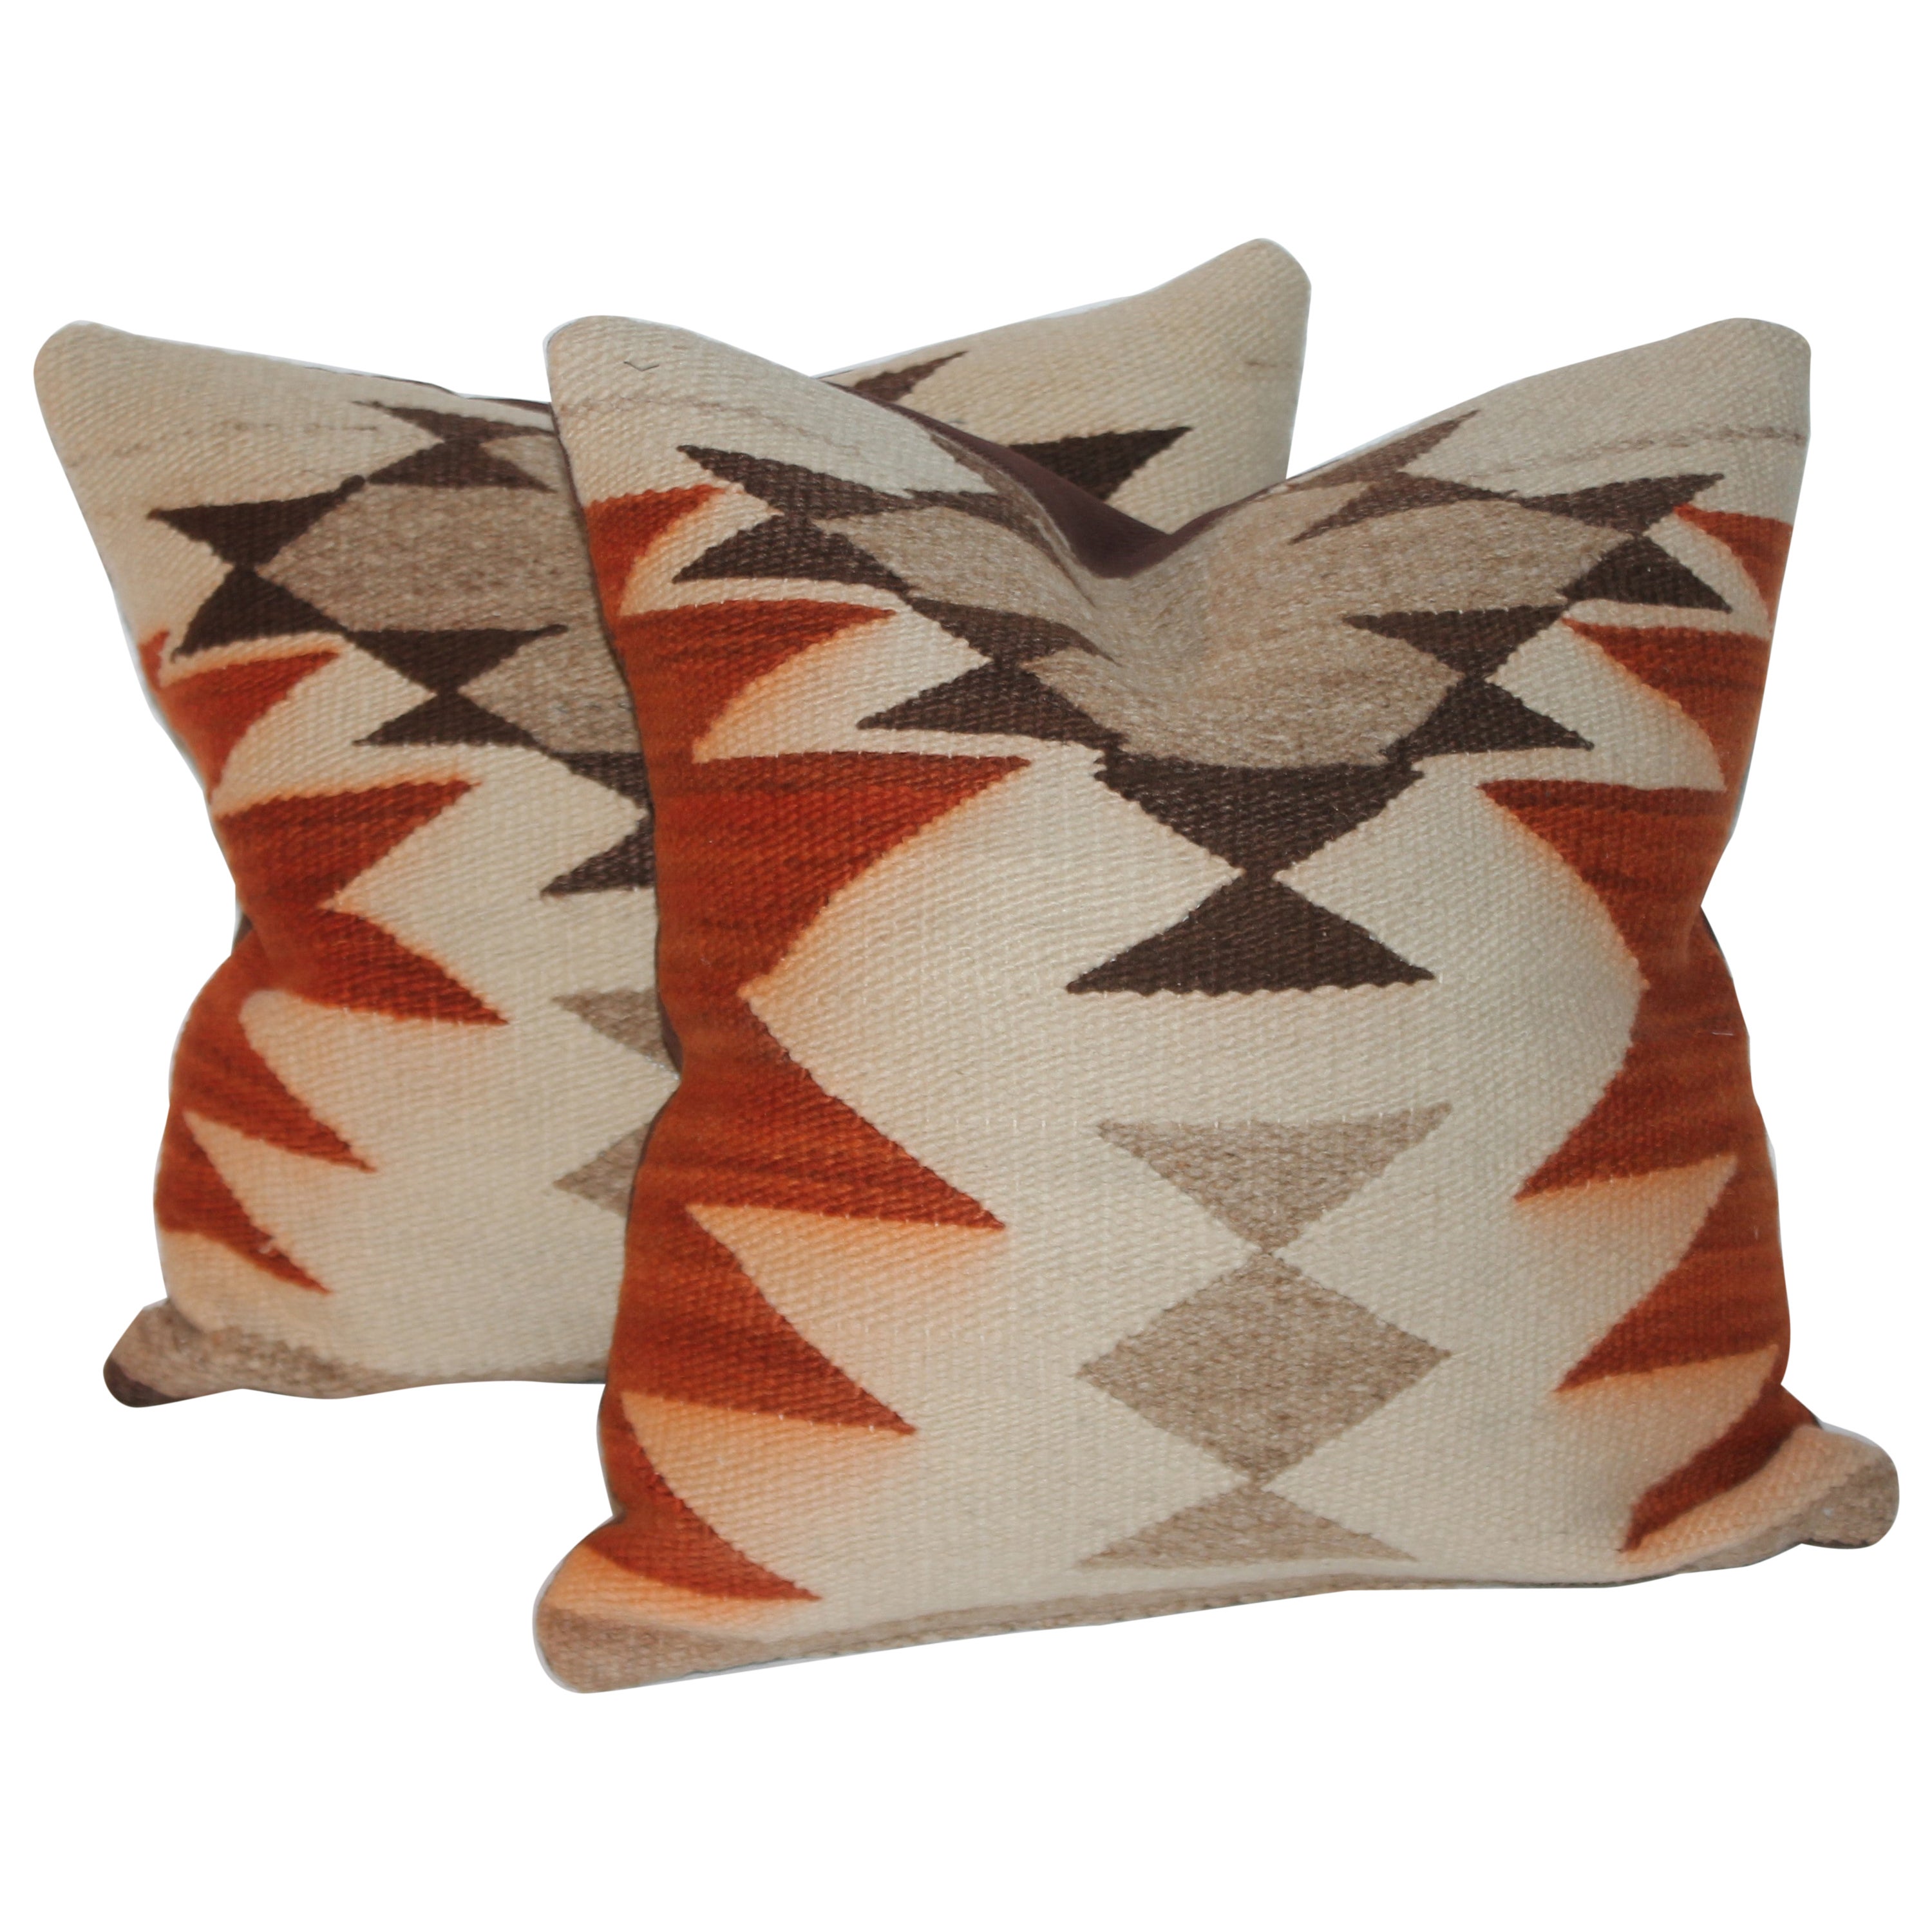 Geometric Navajo Indian Weaving Pillows For Sale